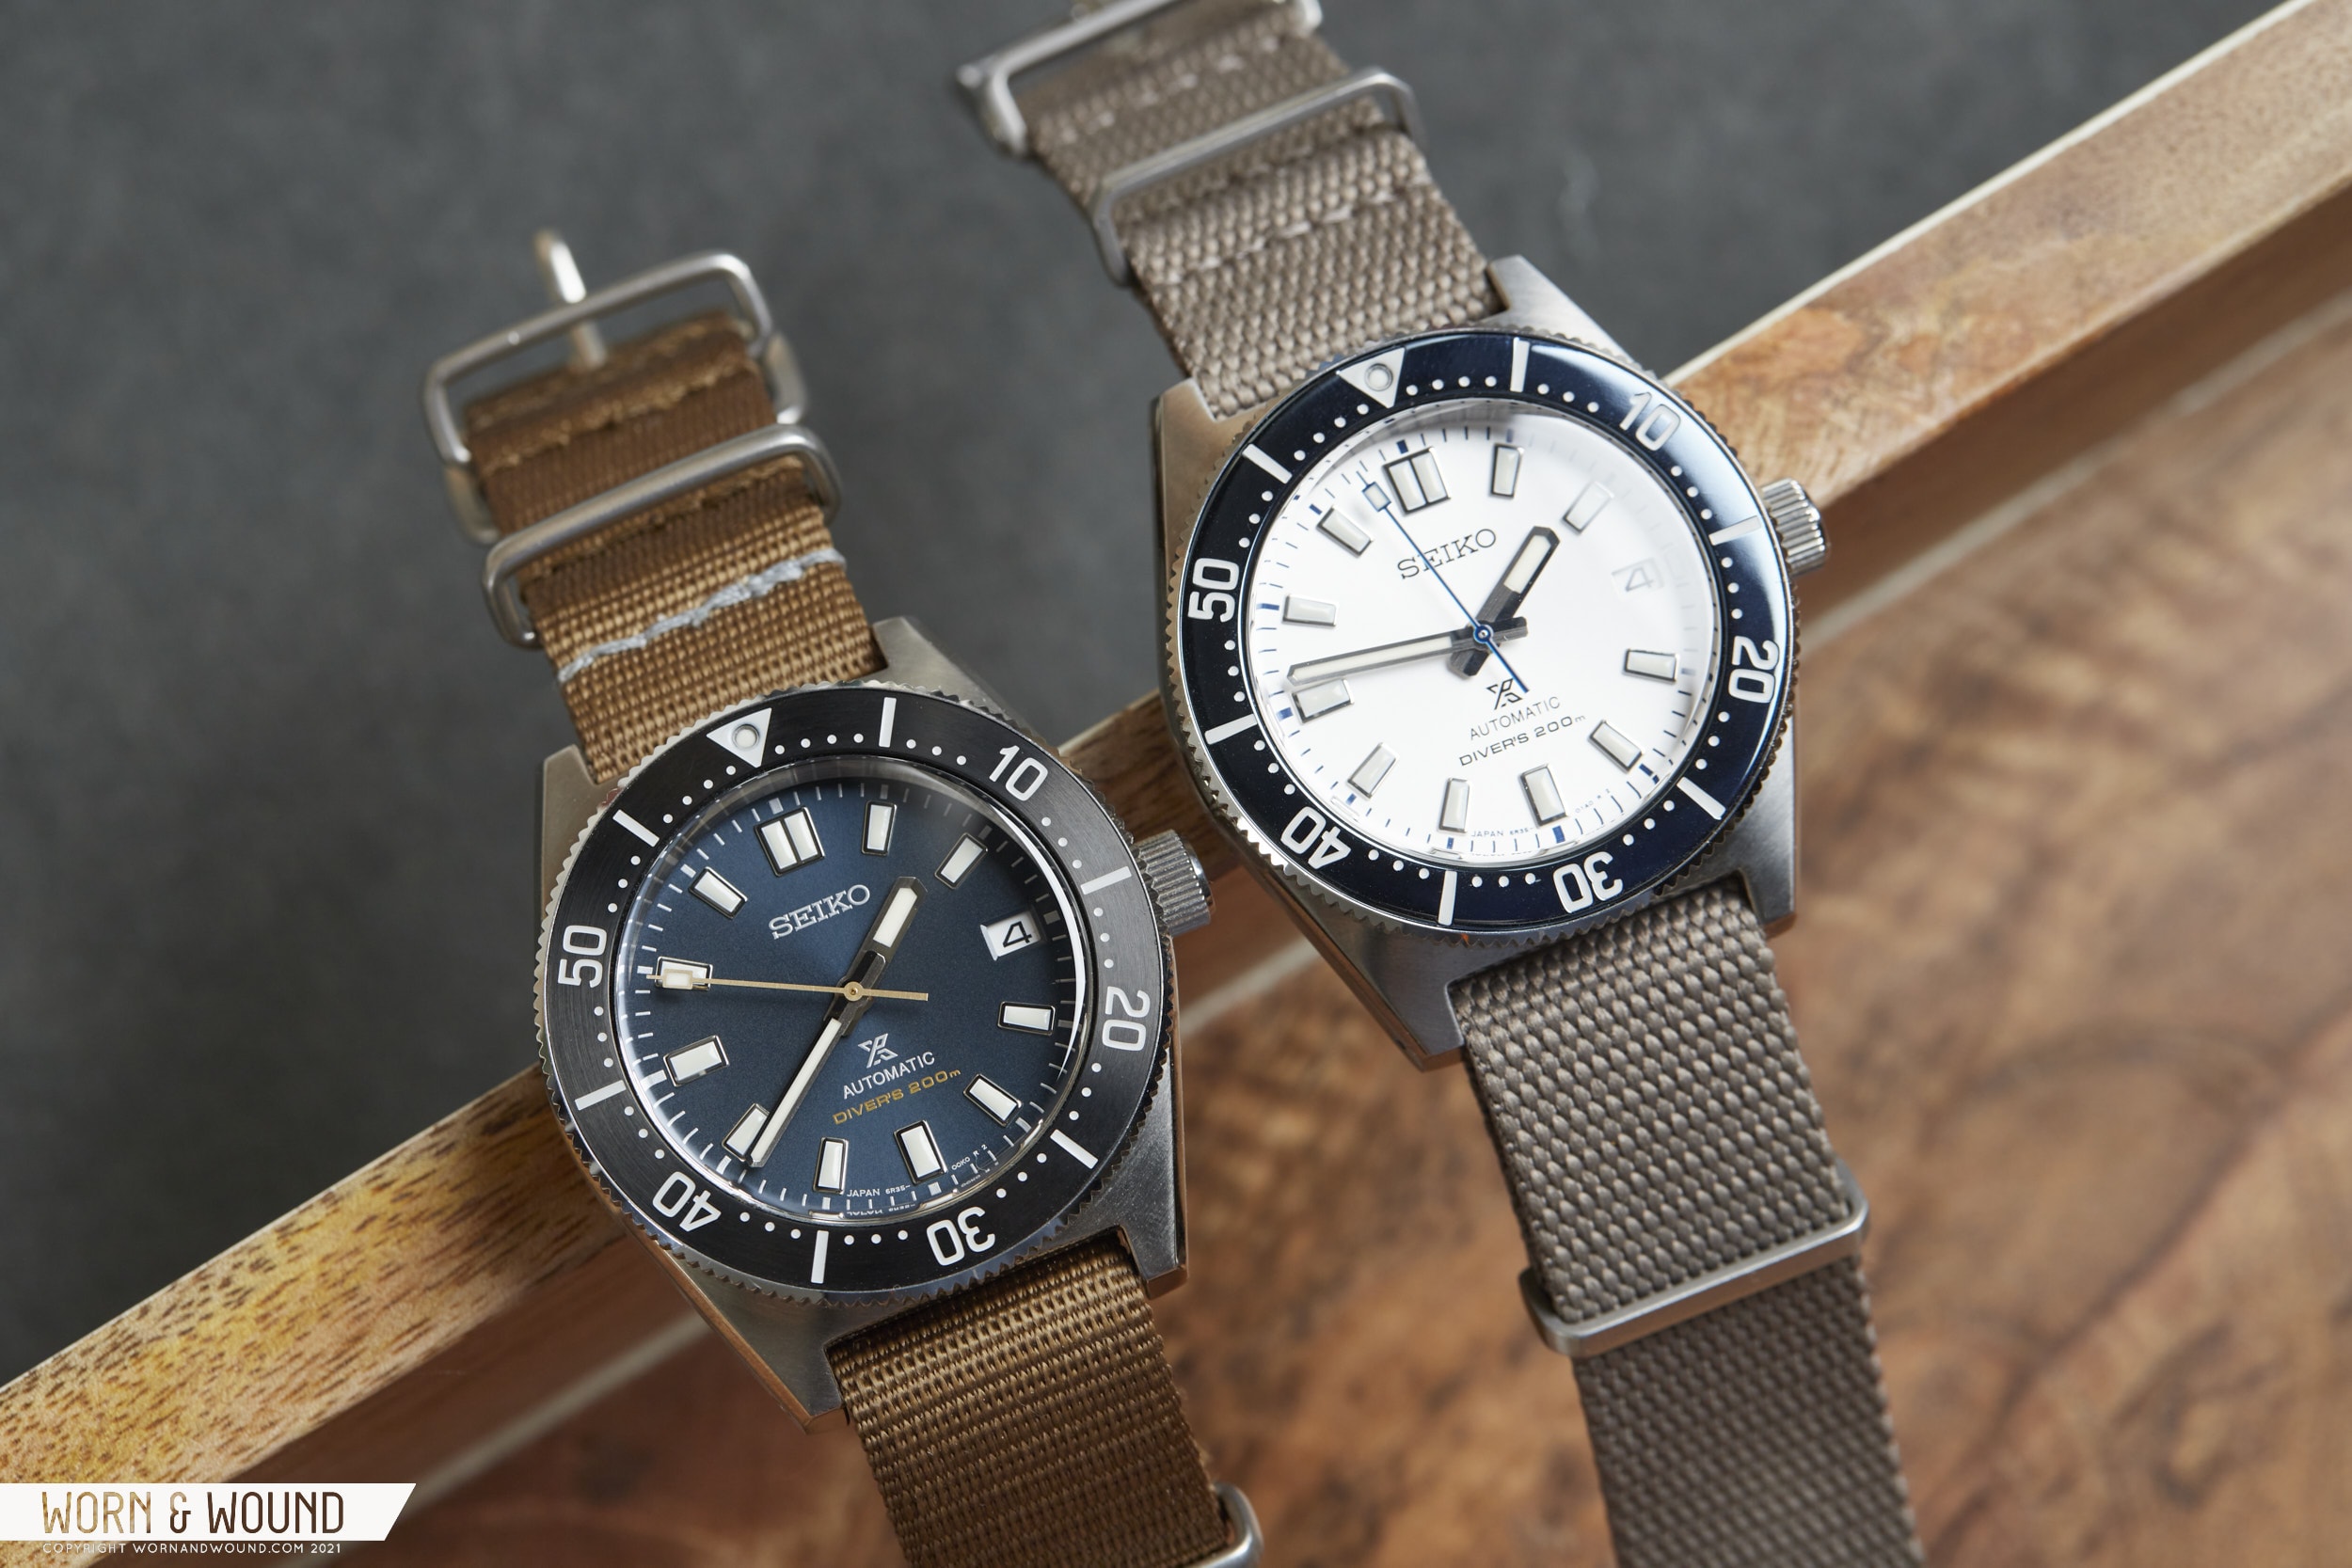 Hands-On With The 140th Anniversary Seiko SPB213 - Worn & Wound